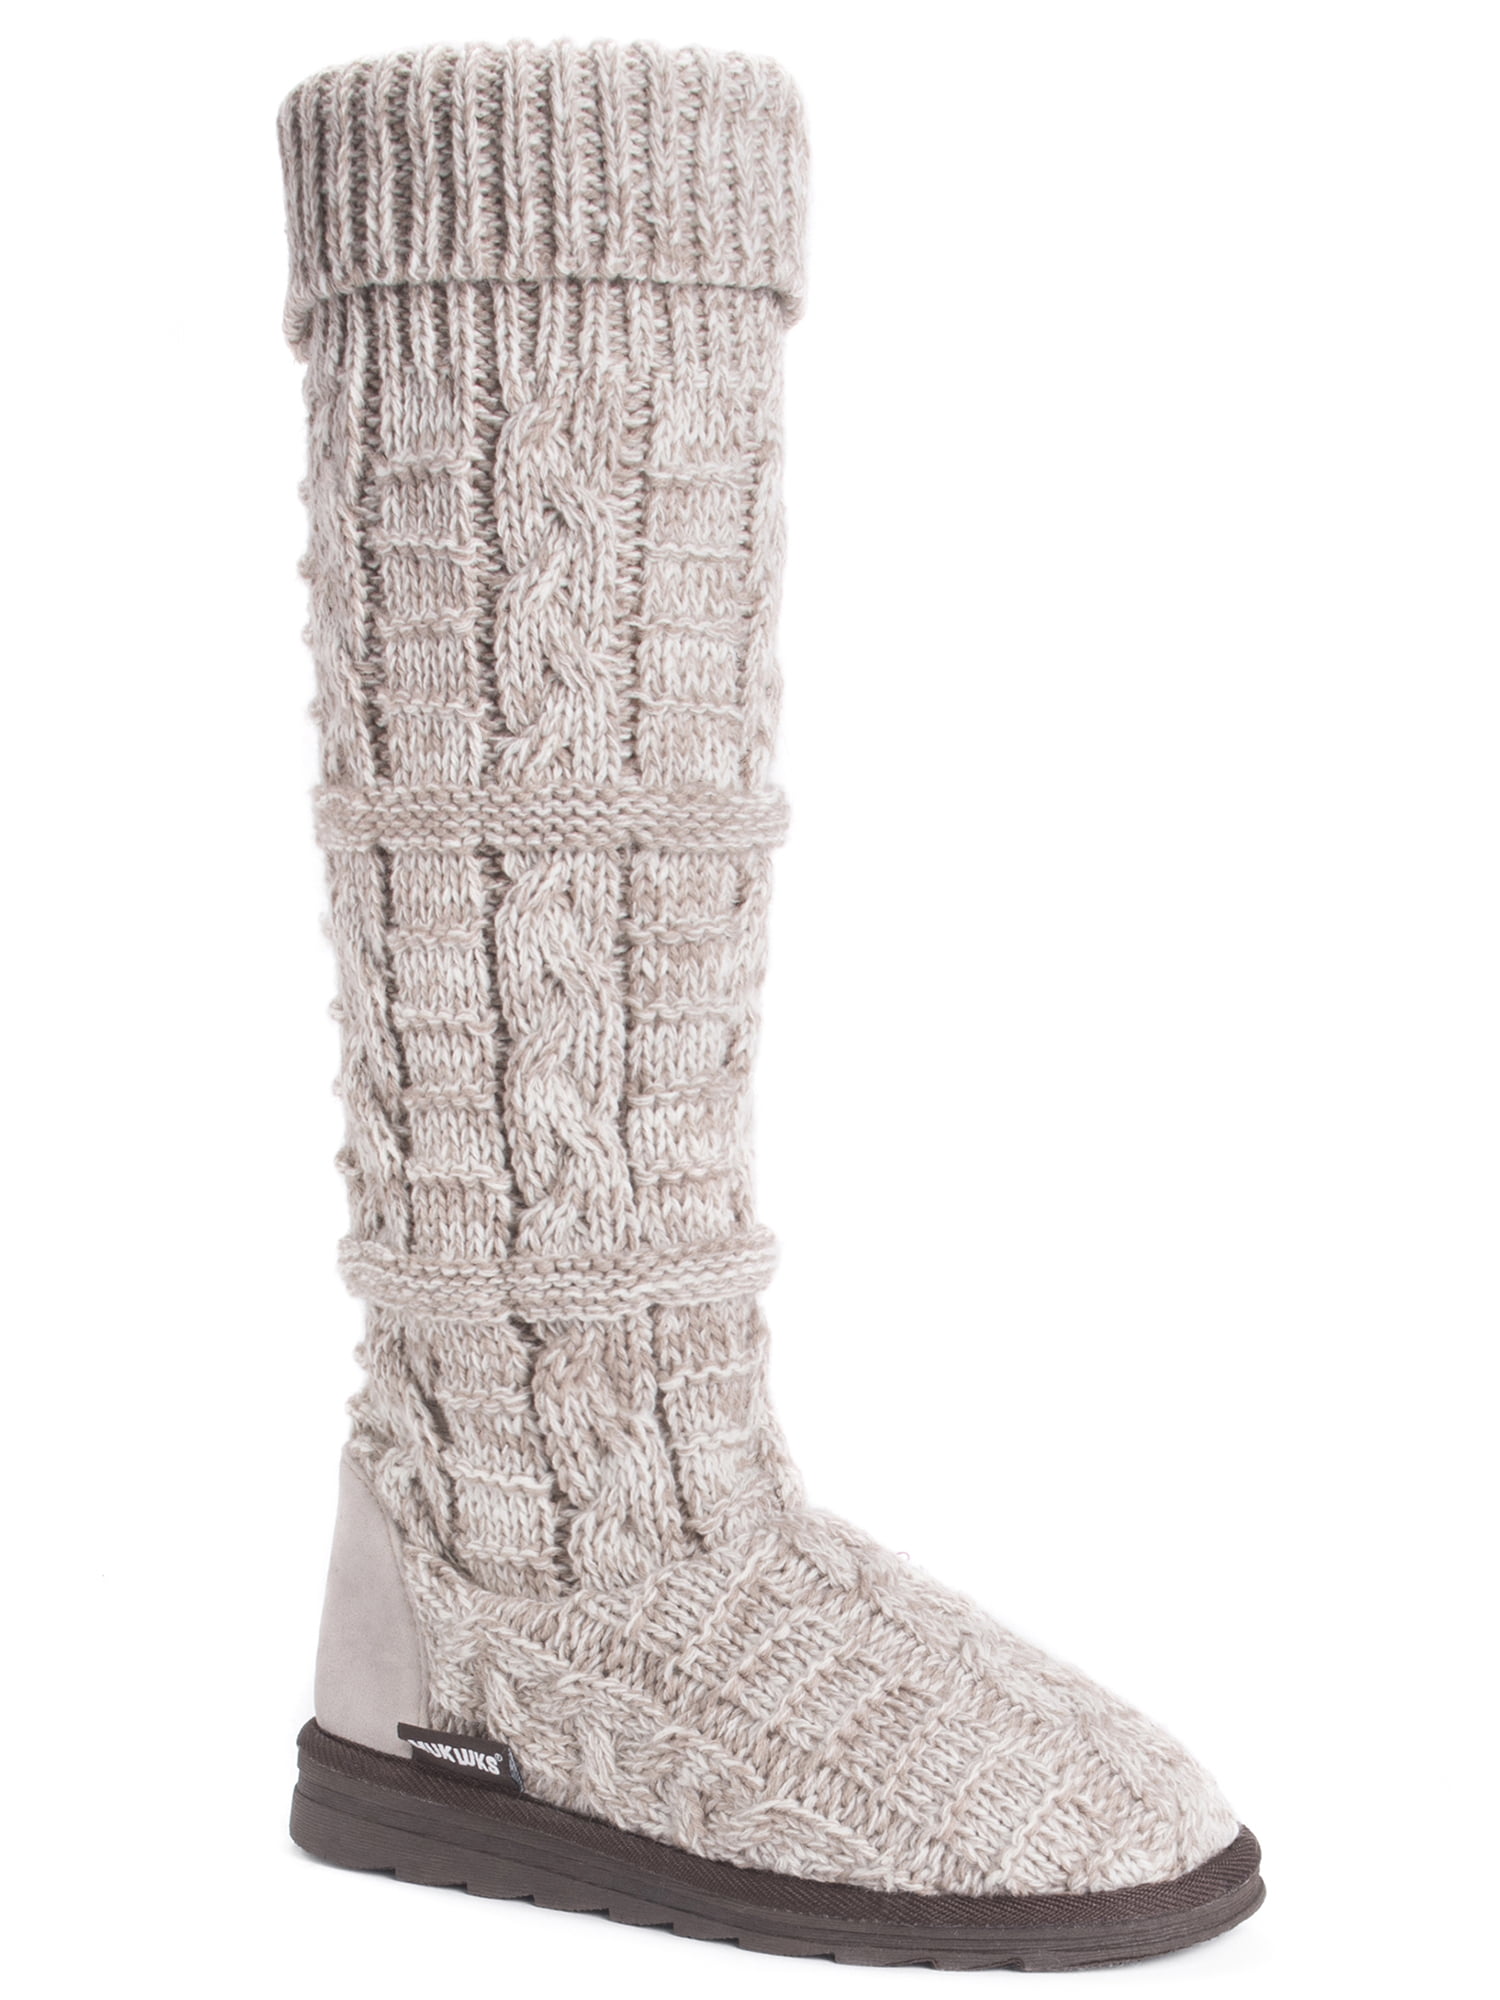 Muk Luks Shelly Marl Knit Sweater Slouch Boot (Women\'s) | Cardigans